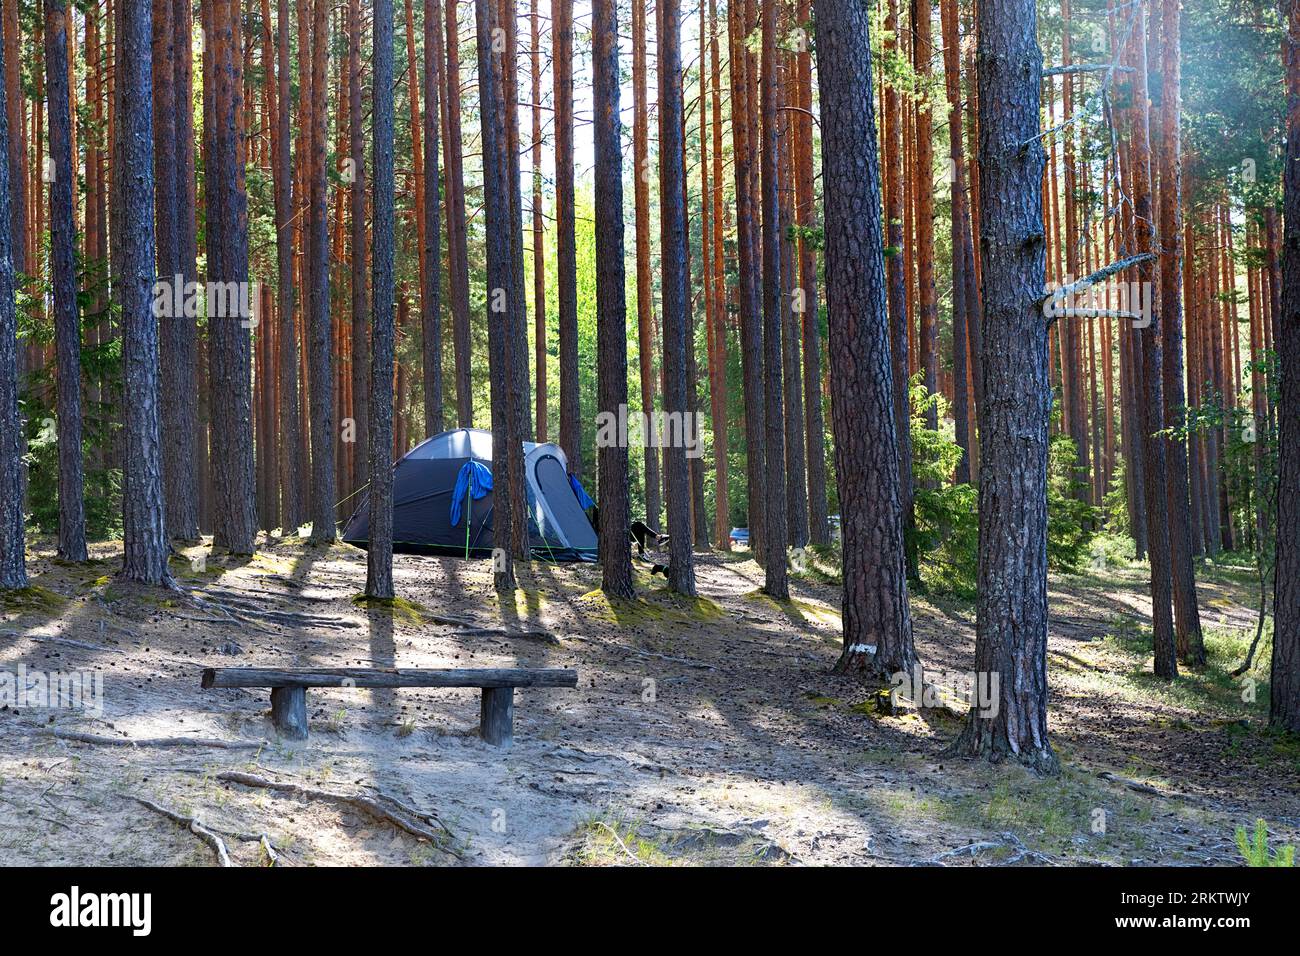 A tent in the middle of the beautiful pine forest close to the Valgojarv lake in Meenikunno protected area on a beautiful summer morning, Estonia Stock Photo